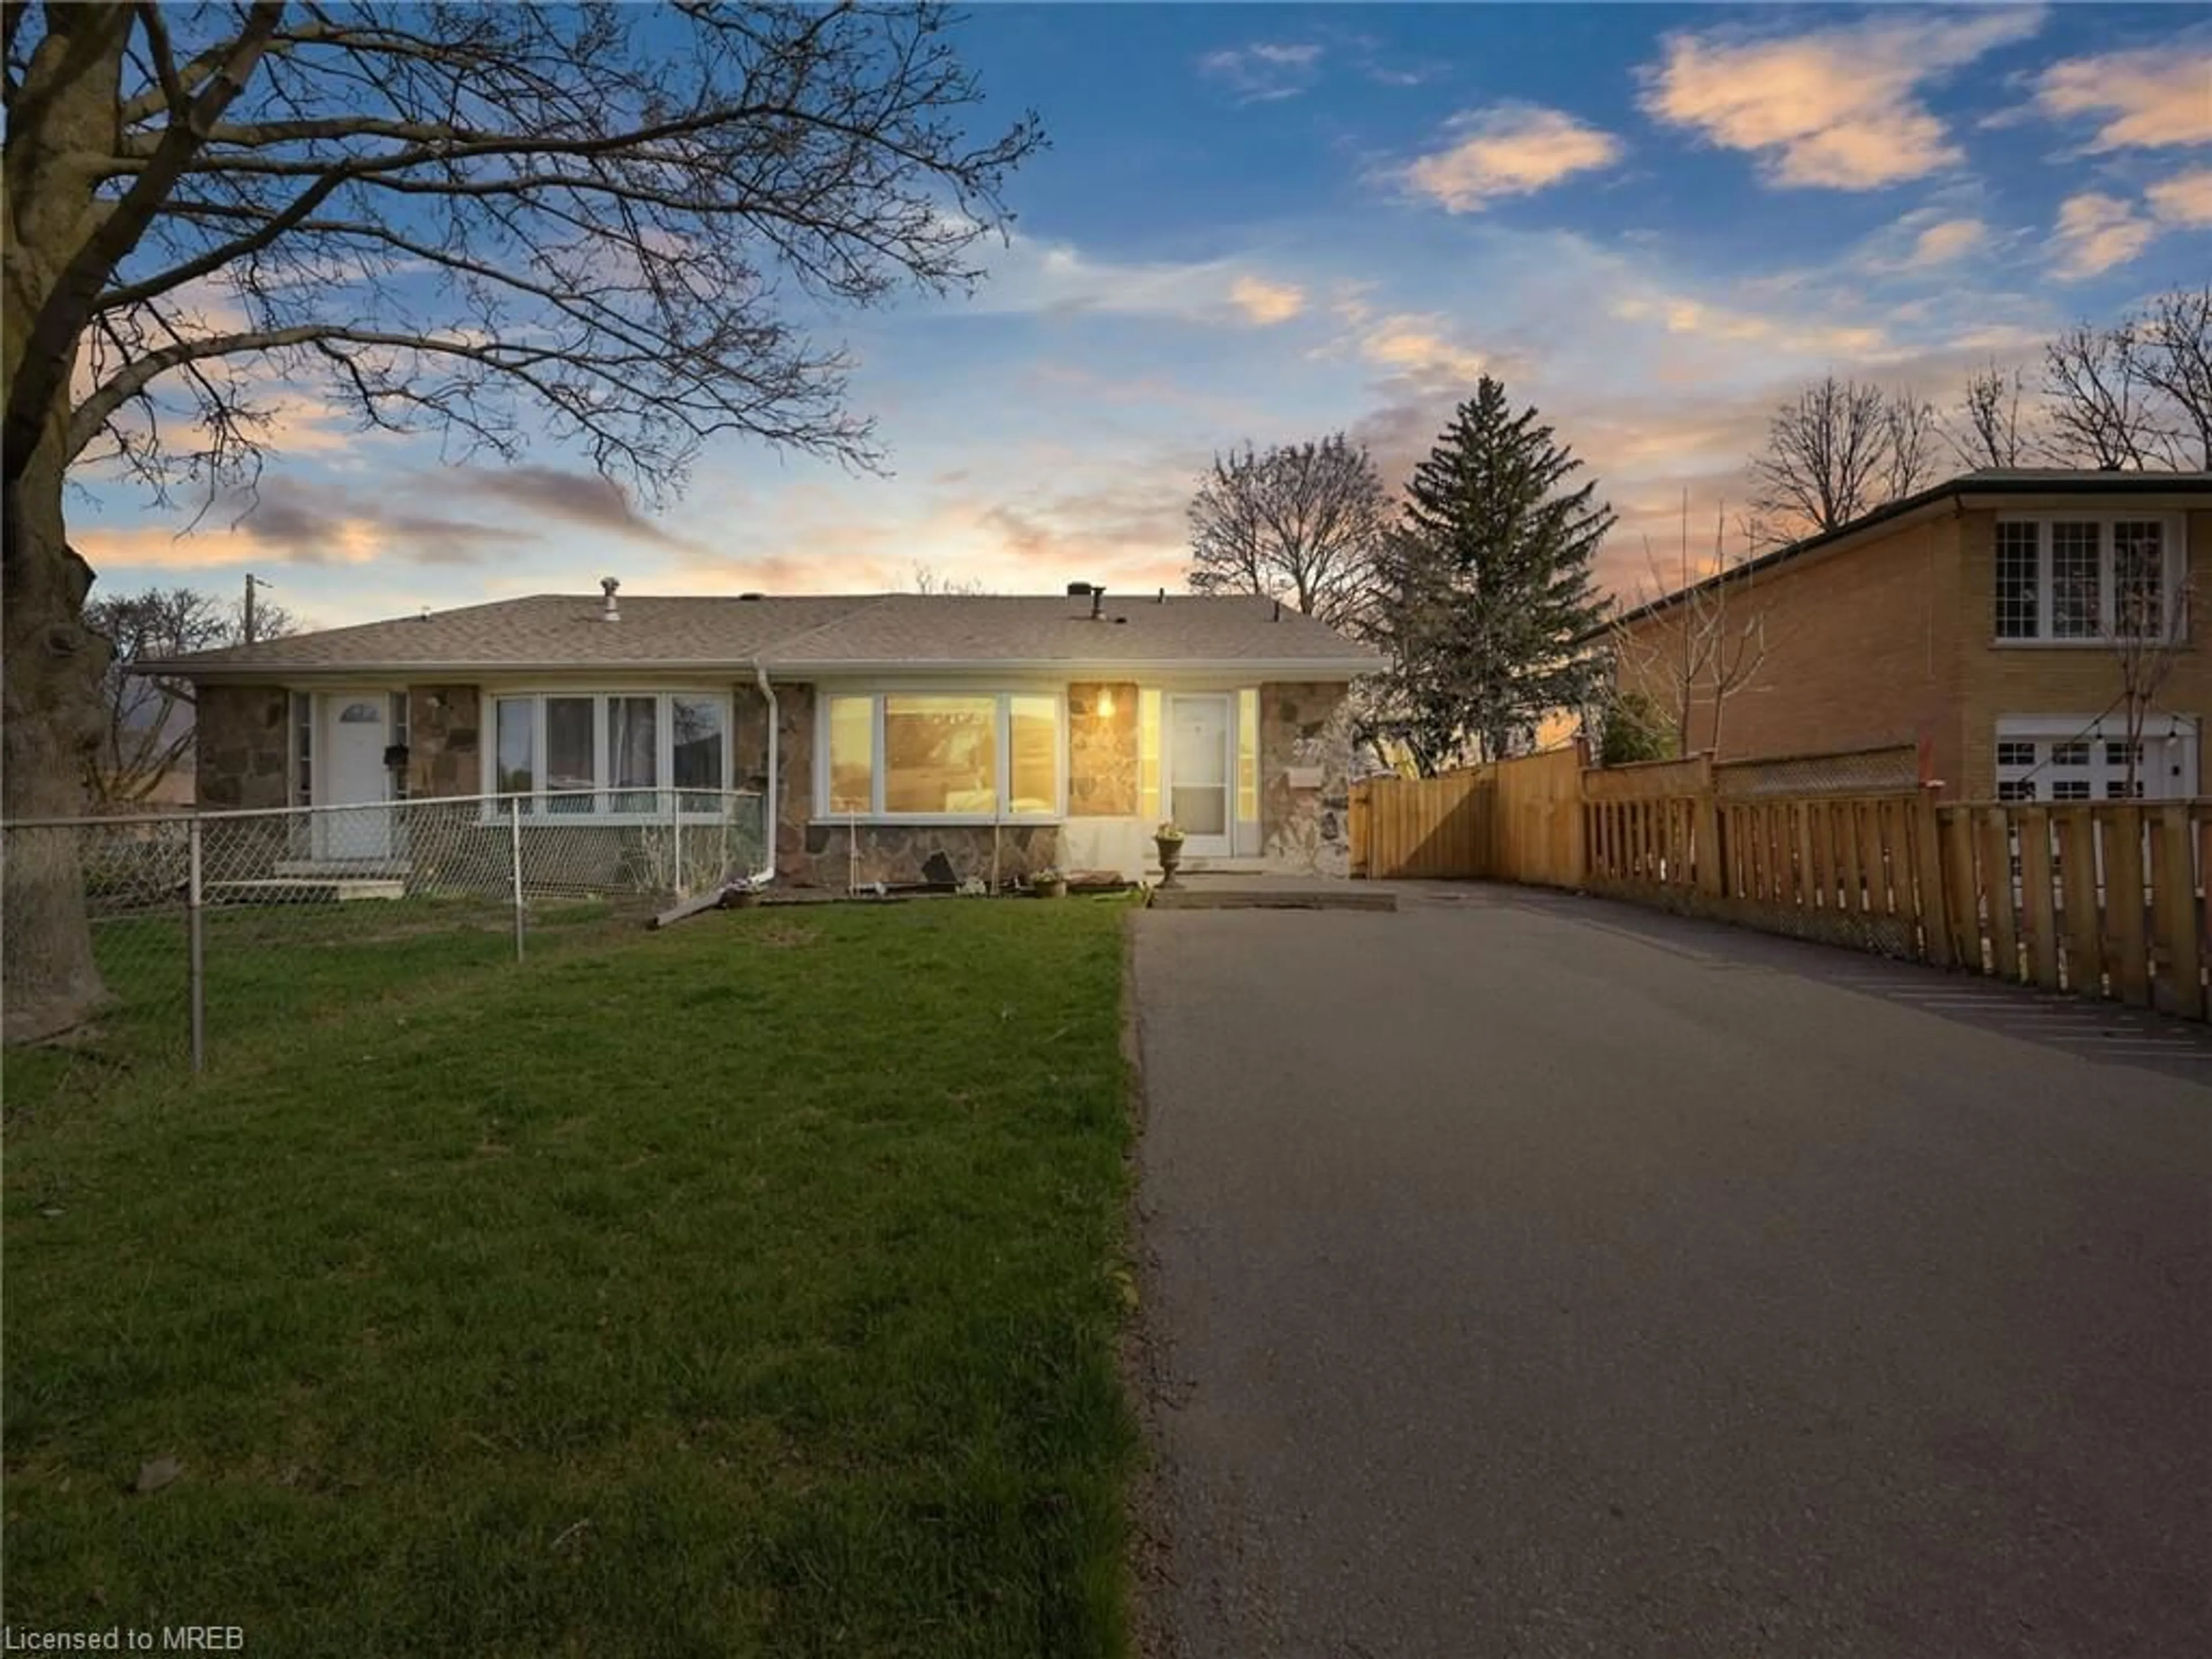 Frontside or backside of a home for 27 Flowertown Ave, Brampton Ontario L6X 2K3